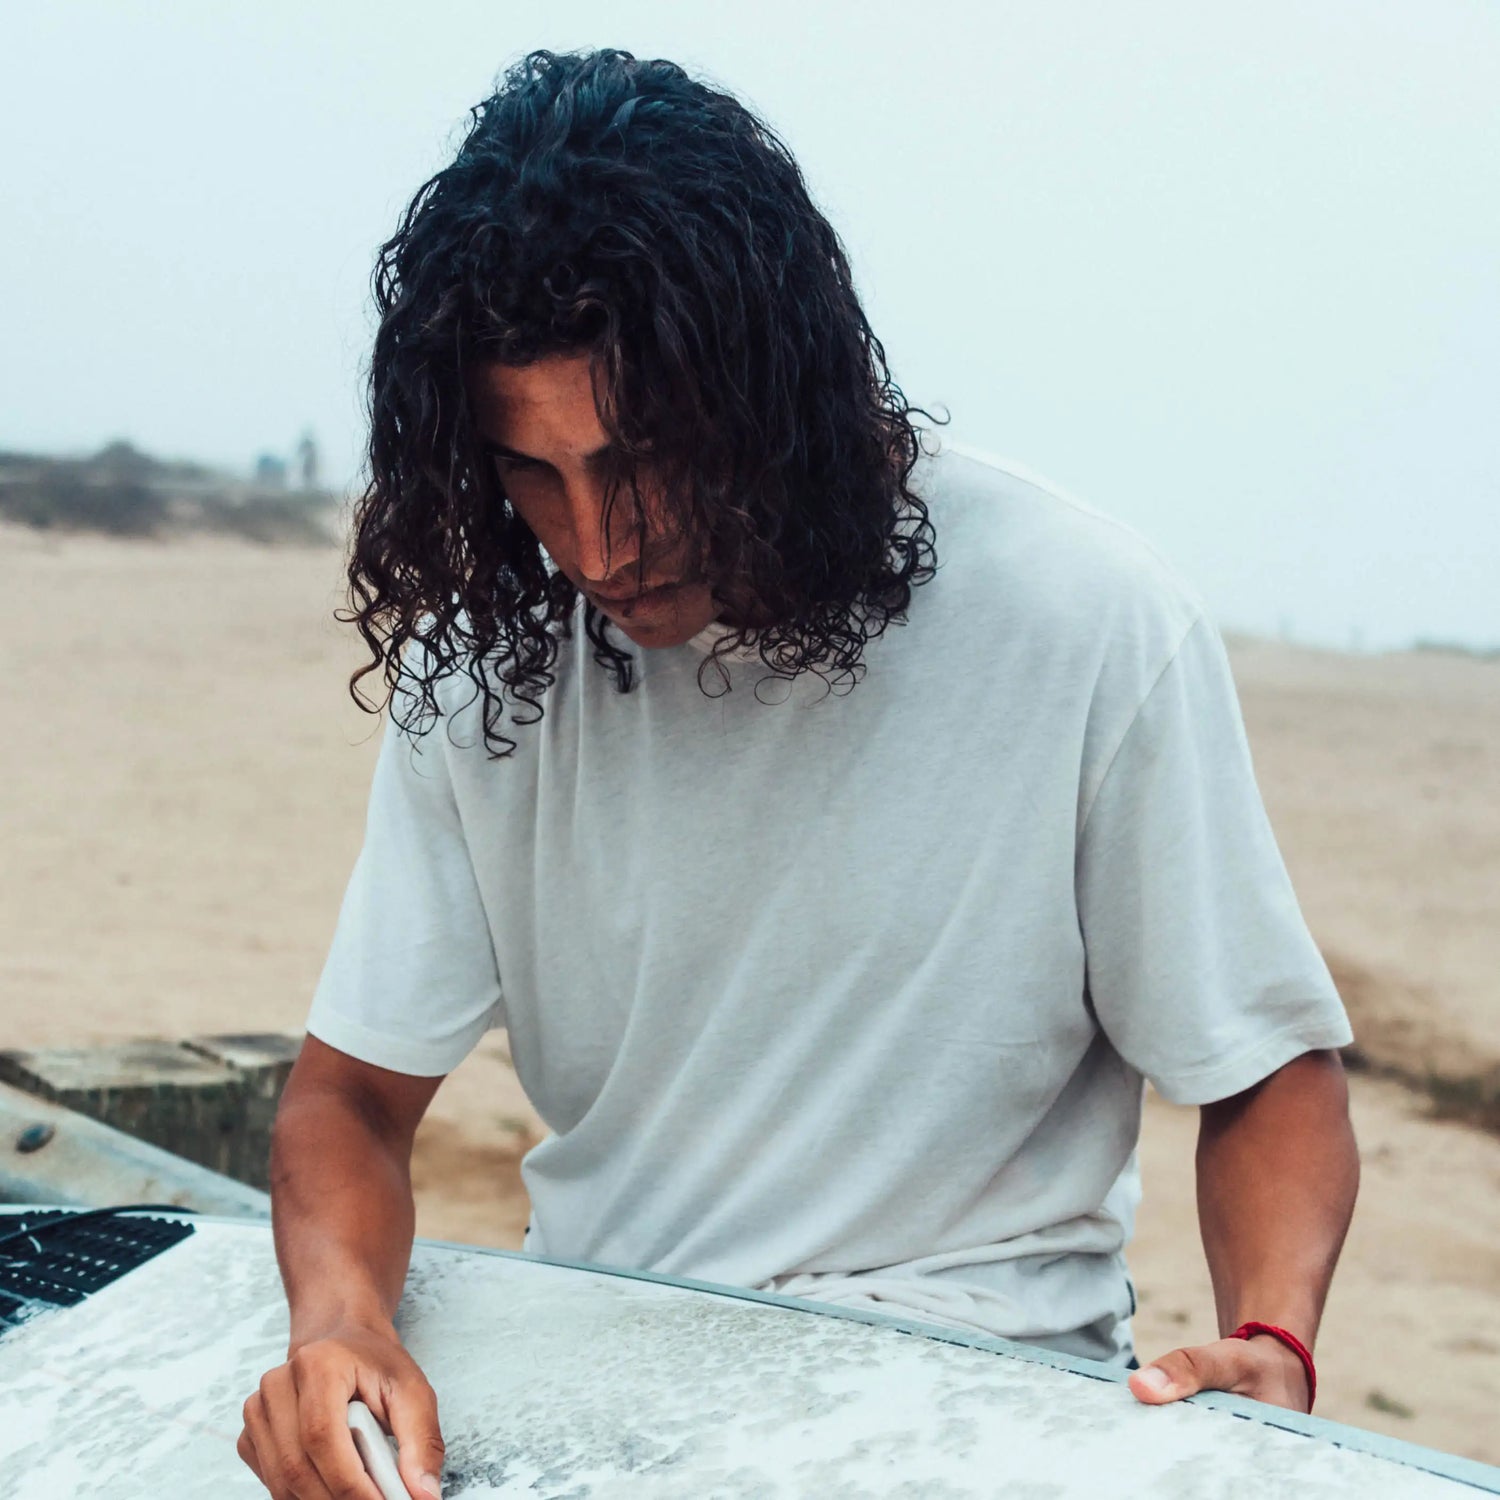 A man with long, wavy hair and his surfboard by the sea